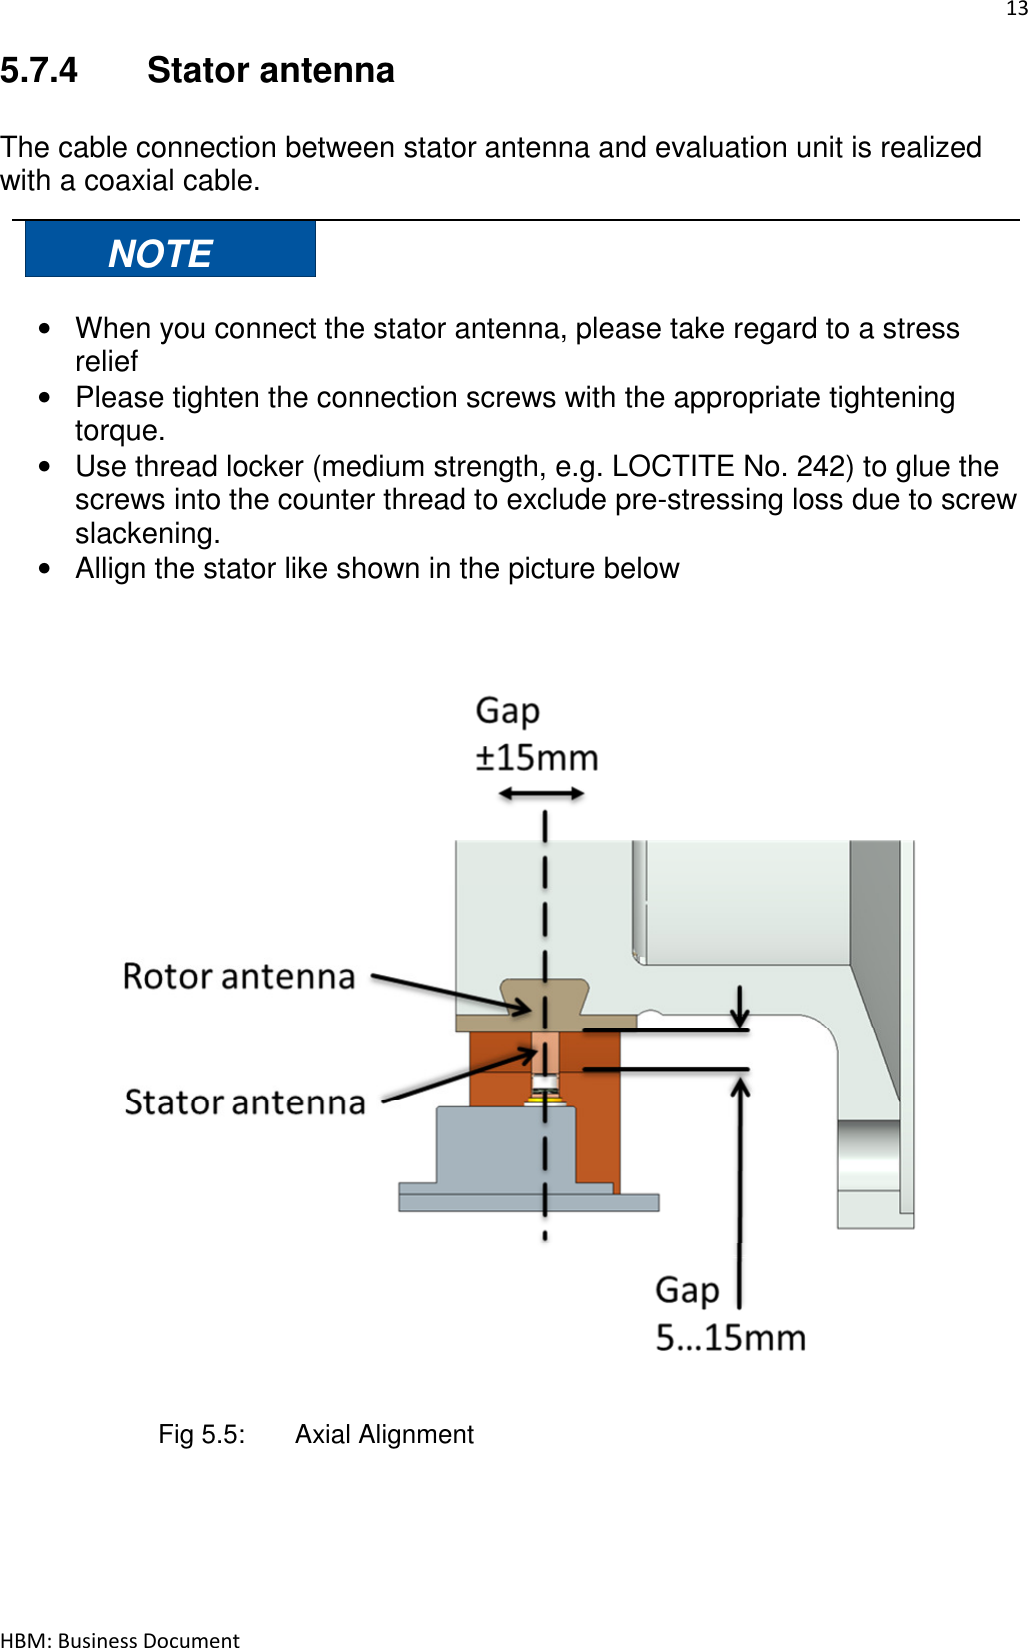 13  HBM: Business Document 5.7.4  Stator antenna  The cable connection between stator antenna and evaluation unit is realized with a coaxial cable.  NOTE  •  When you connect the stator antenna, please take regard to a stress relief •  Please tighten the connection screws with the appropriate tightening torque. •  Use thread locker (medium strength, e.g. LOCTITE No. 242) to glue the screws into the counter thread to exclude pre-stressing loss due to screw slackening. •  Allign the stator like shown in the picture below                         Fig 5.5:   Axial Alignment      